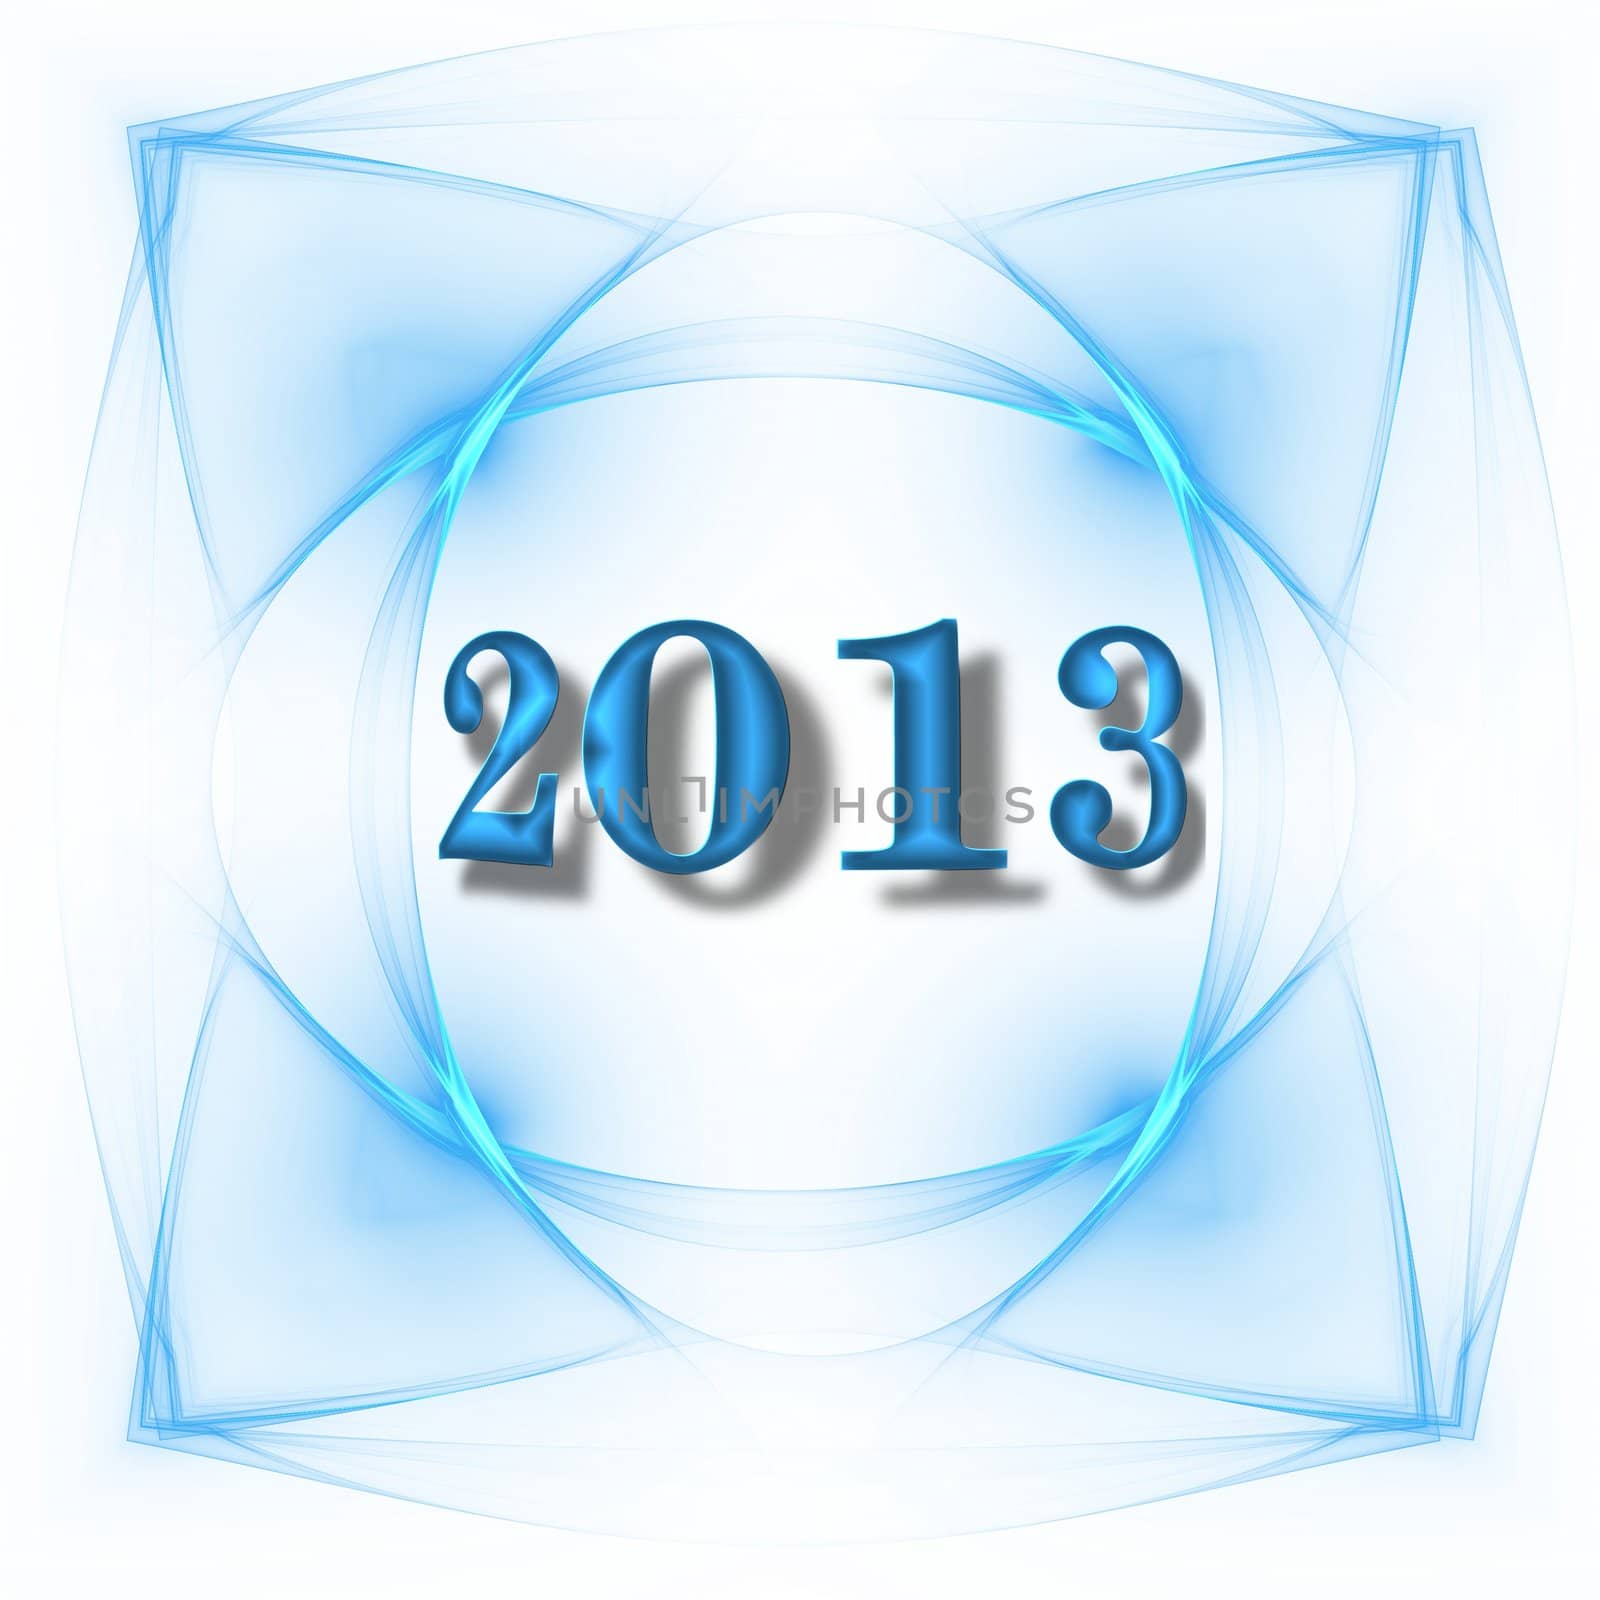  new year 2013 design  by lkant